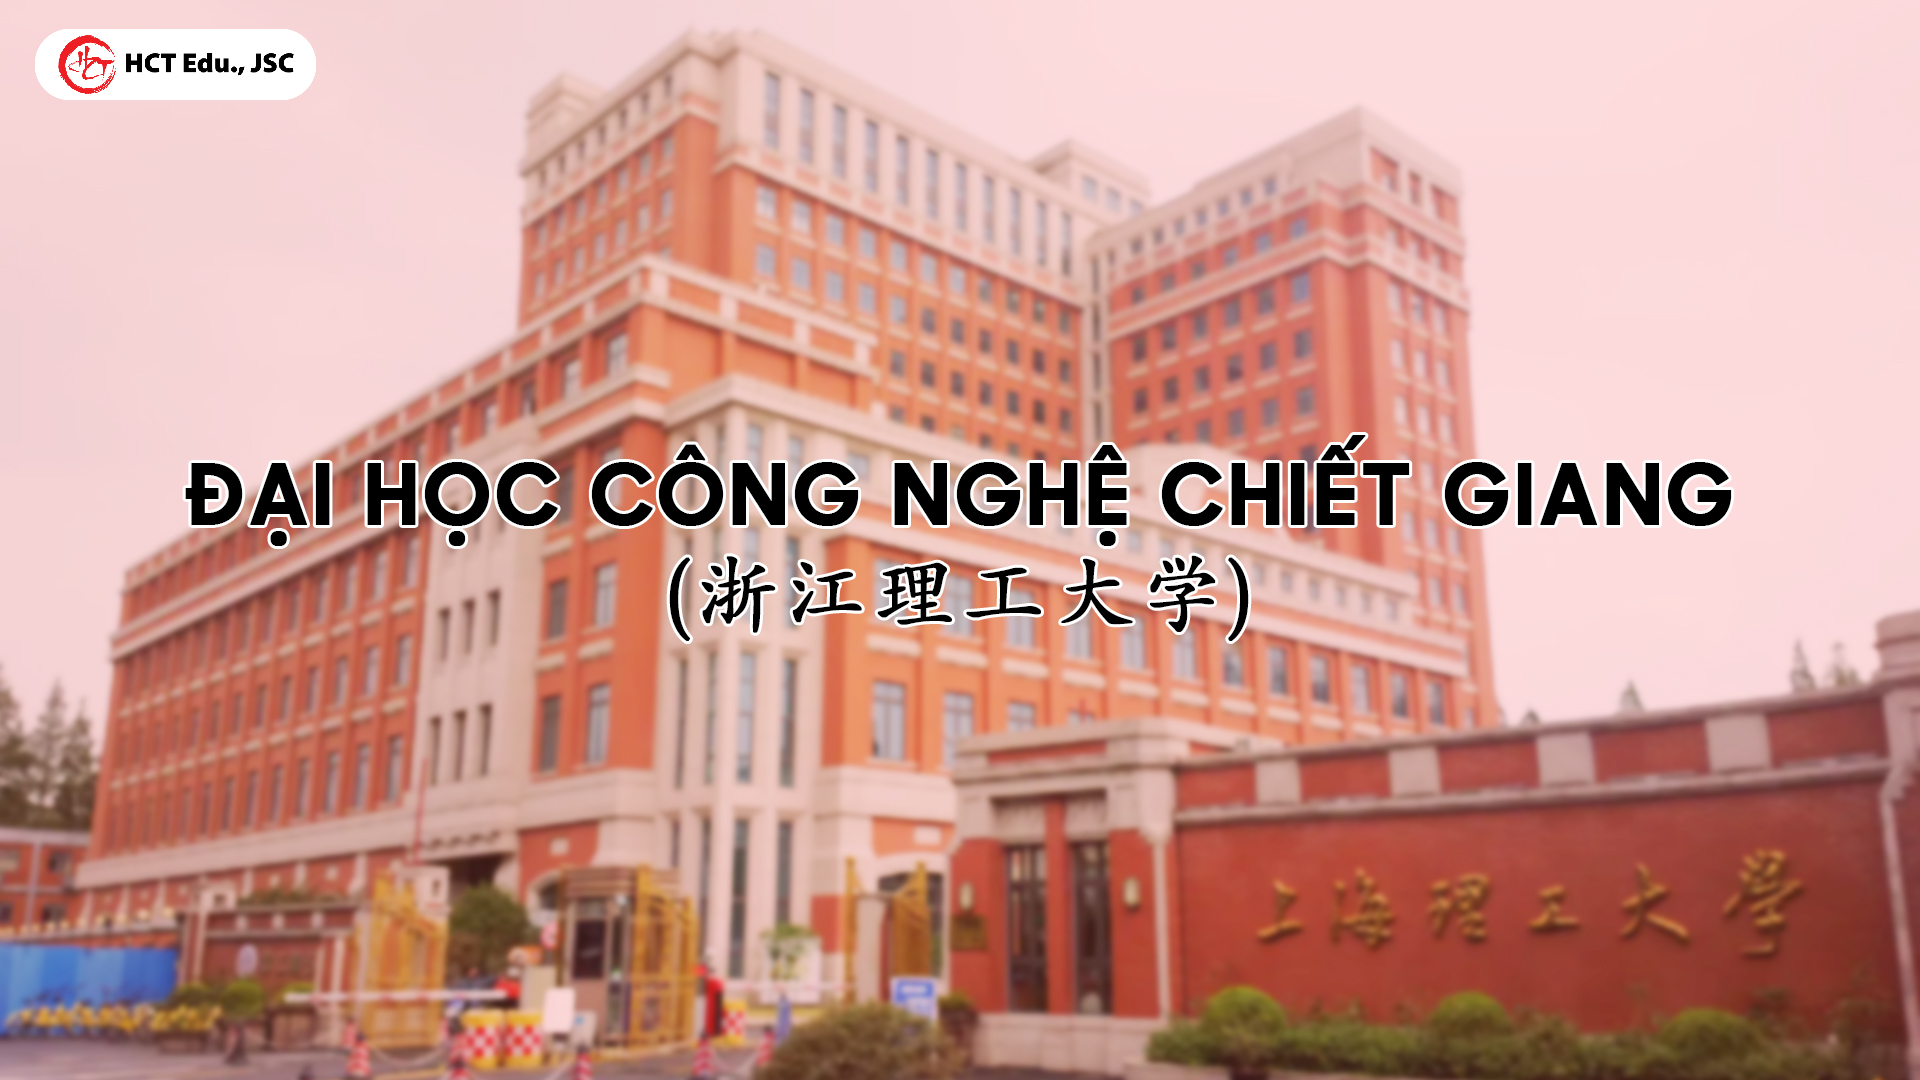 dai hoc cong nghe chiet giang trung quoc